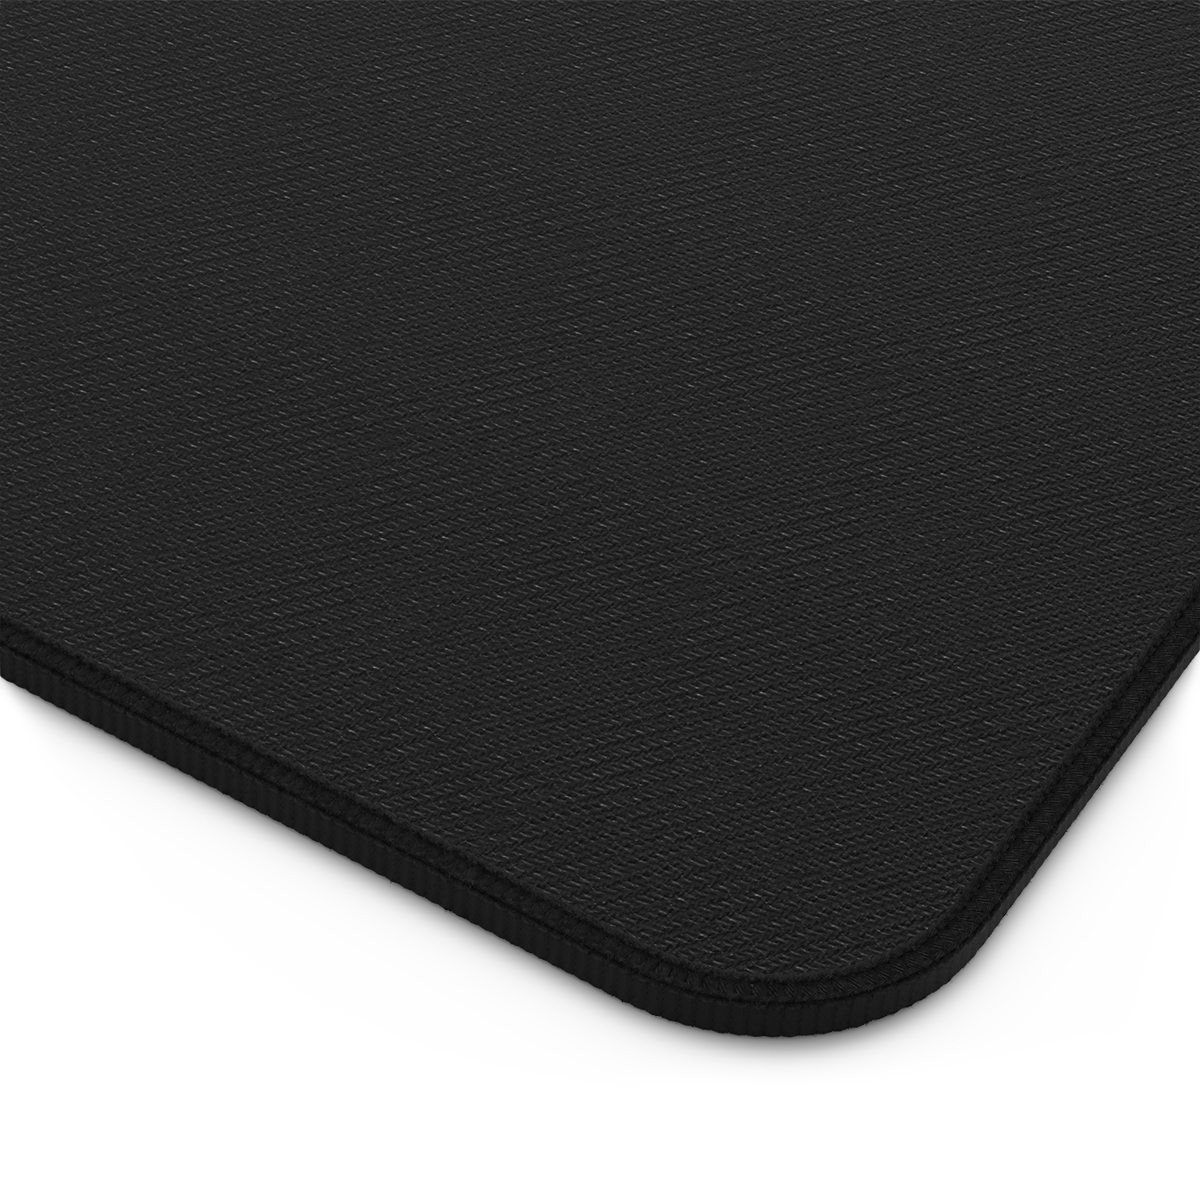 Playmat/Desk Mat - Getting Chilly